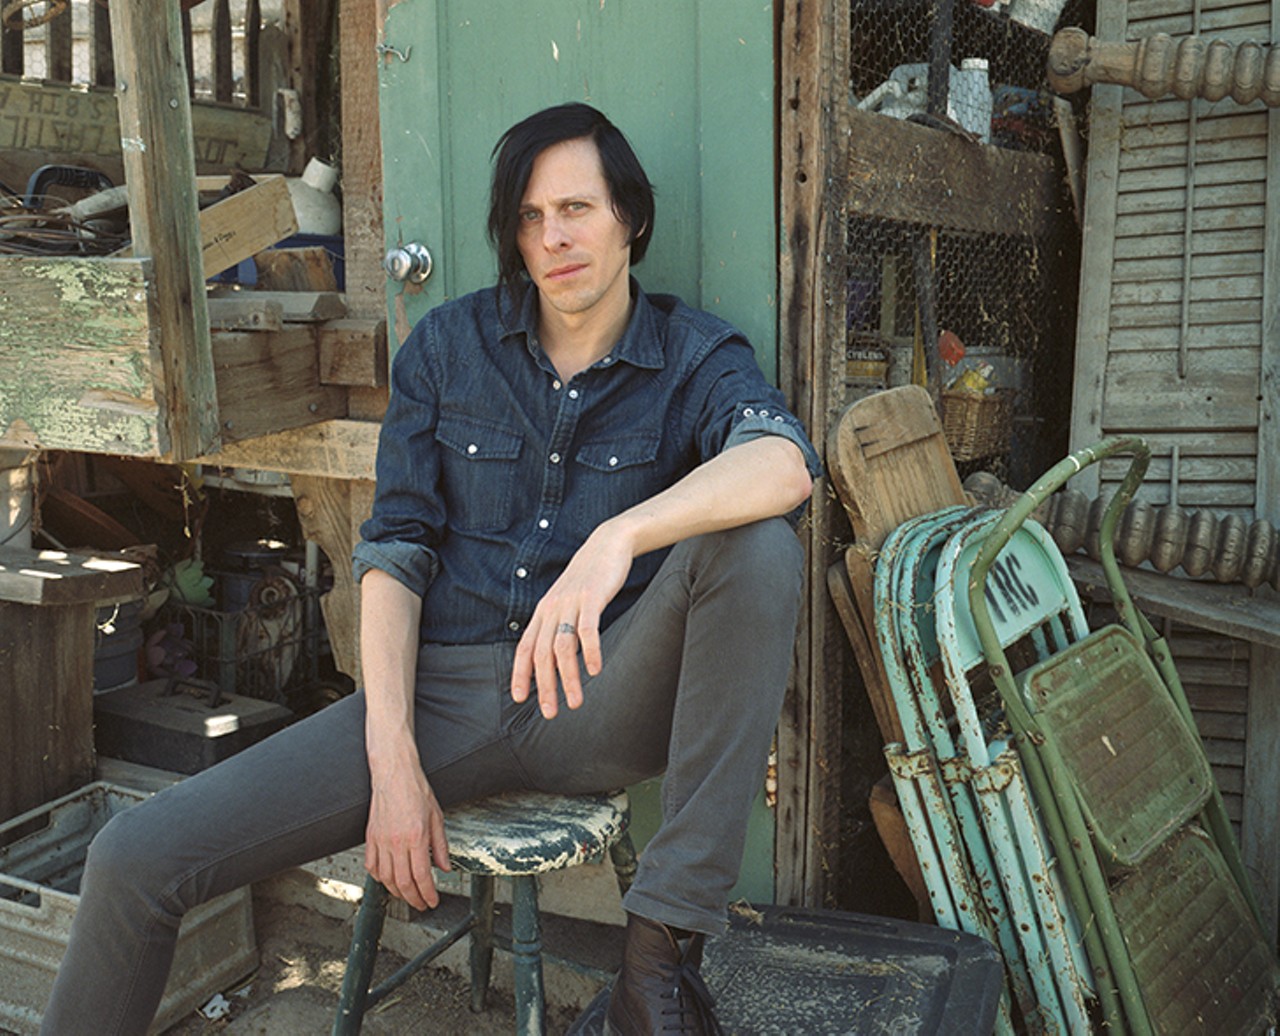 Thursday, July 21Ken Stringfellow of the Posies at Lil Indies